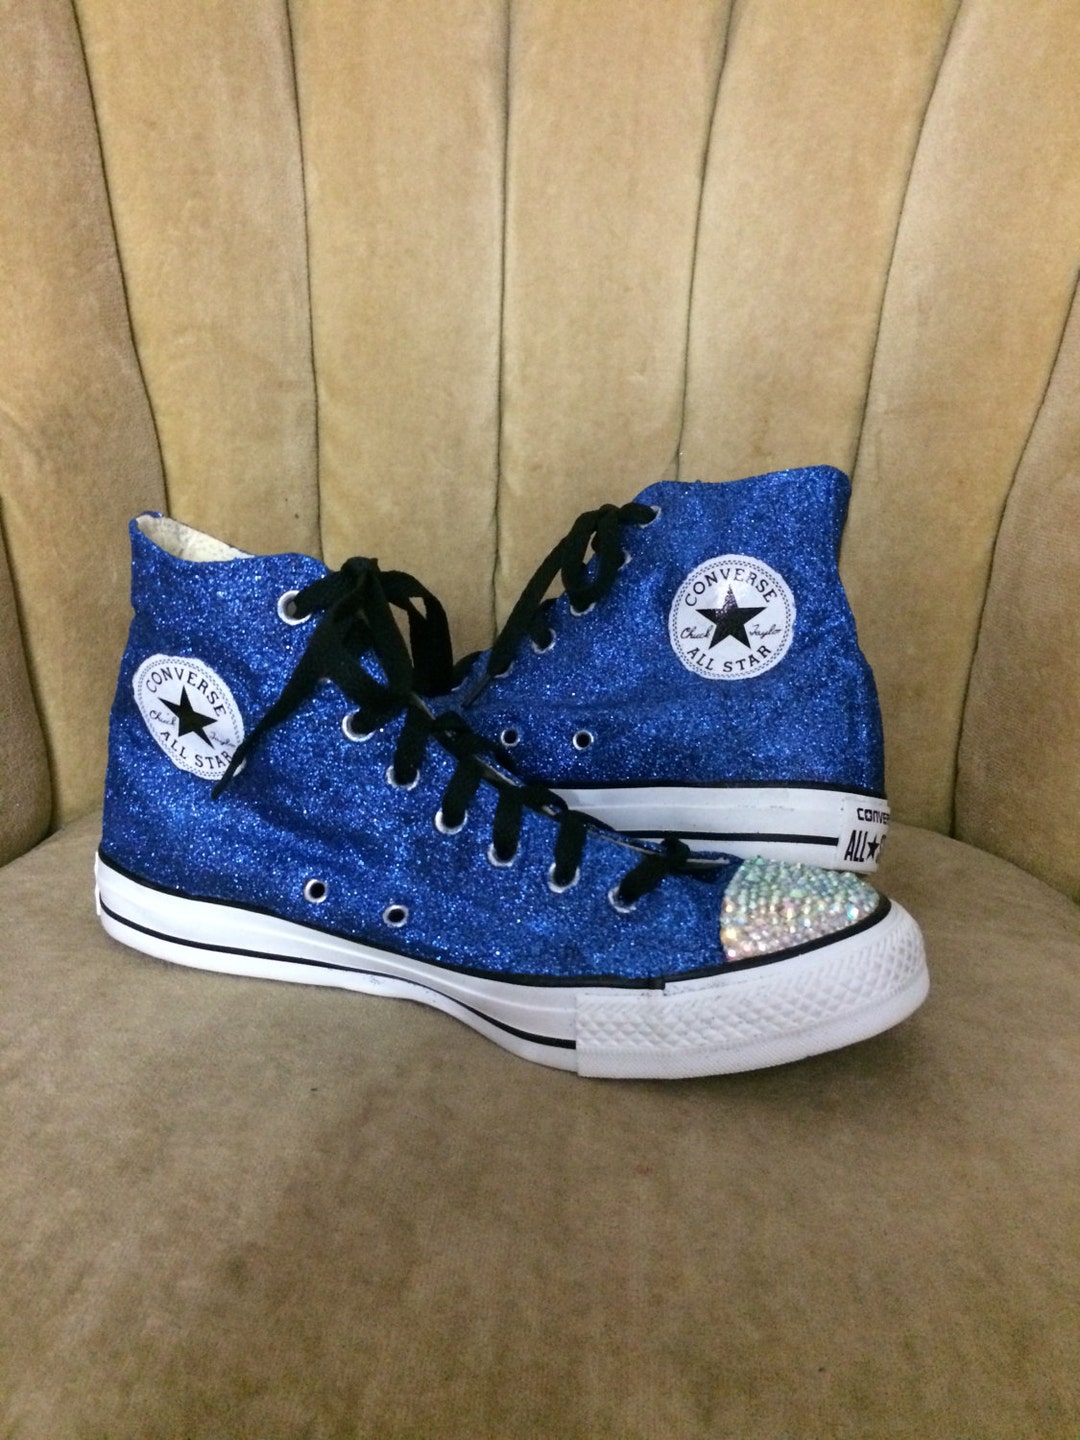 Blue Converse All Stars. Blue Glitter Converse With Bling - Etsy